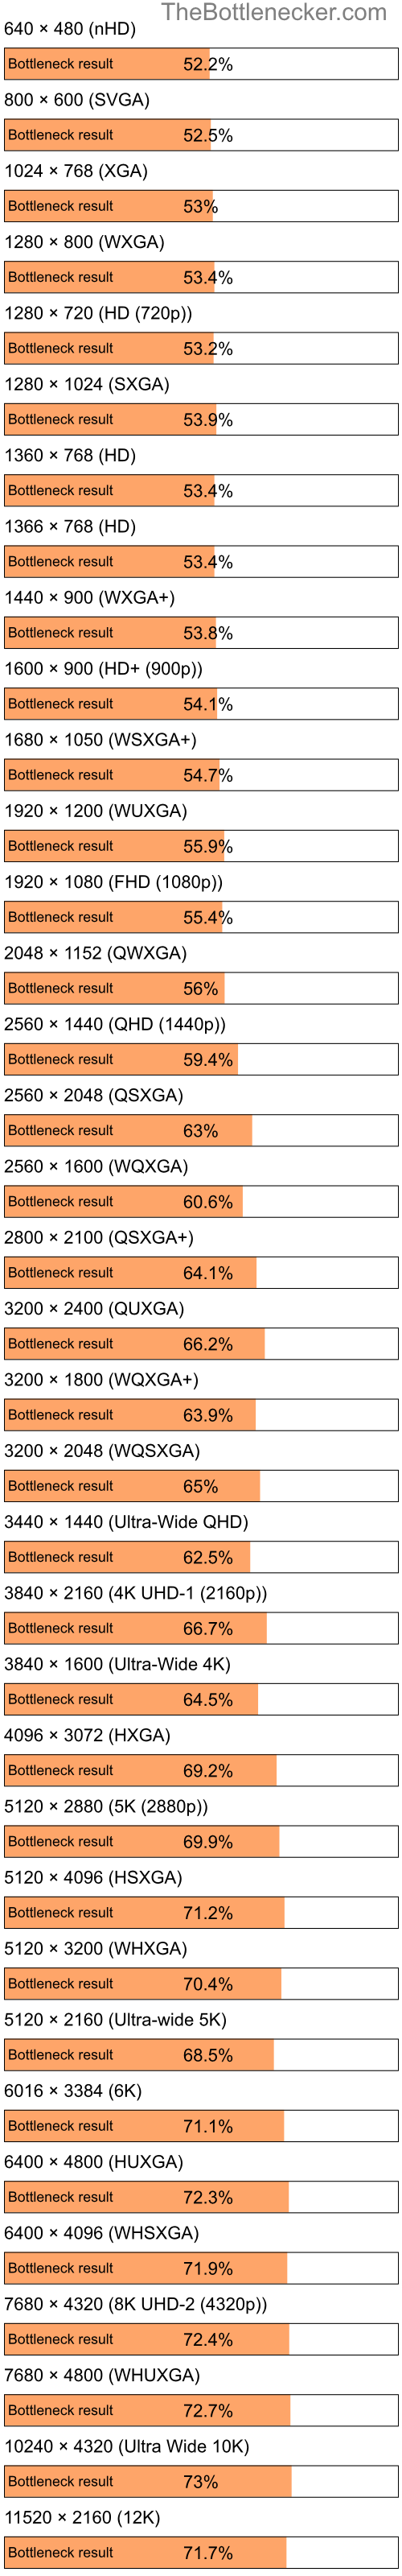 Bottleneck results by resolution for Intel Pentium 4 and NVIDIA GeForce 8400 in Processor Intense Tasks